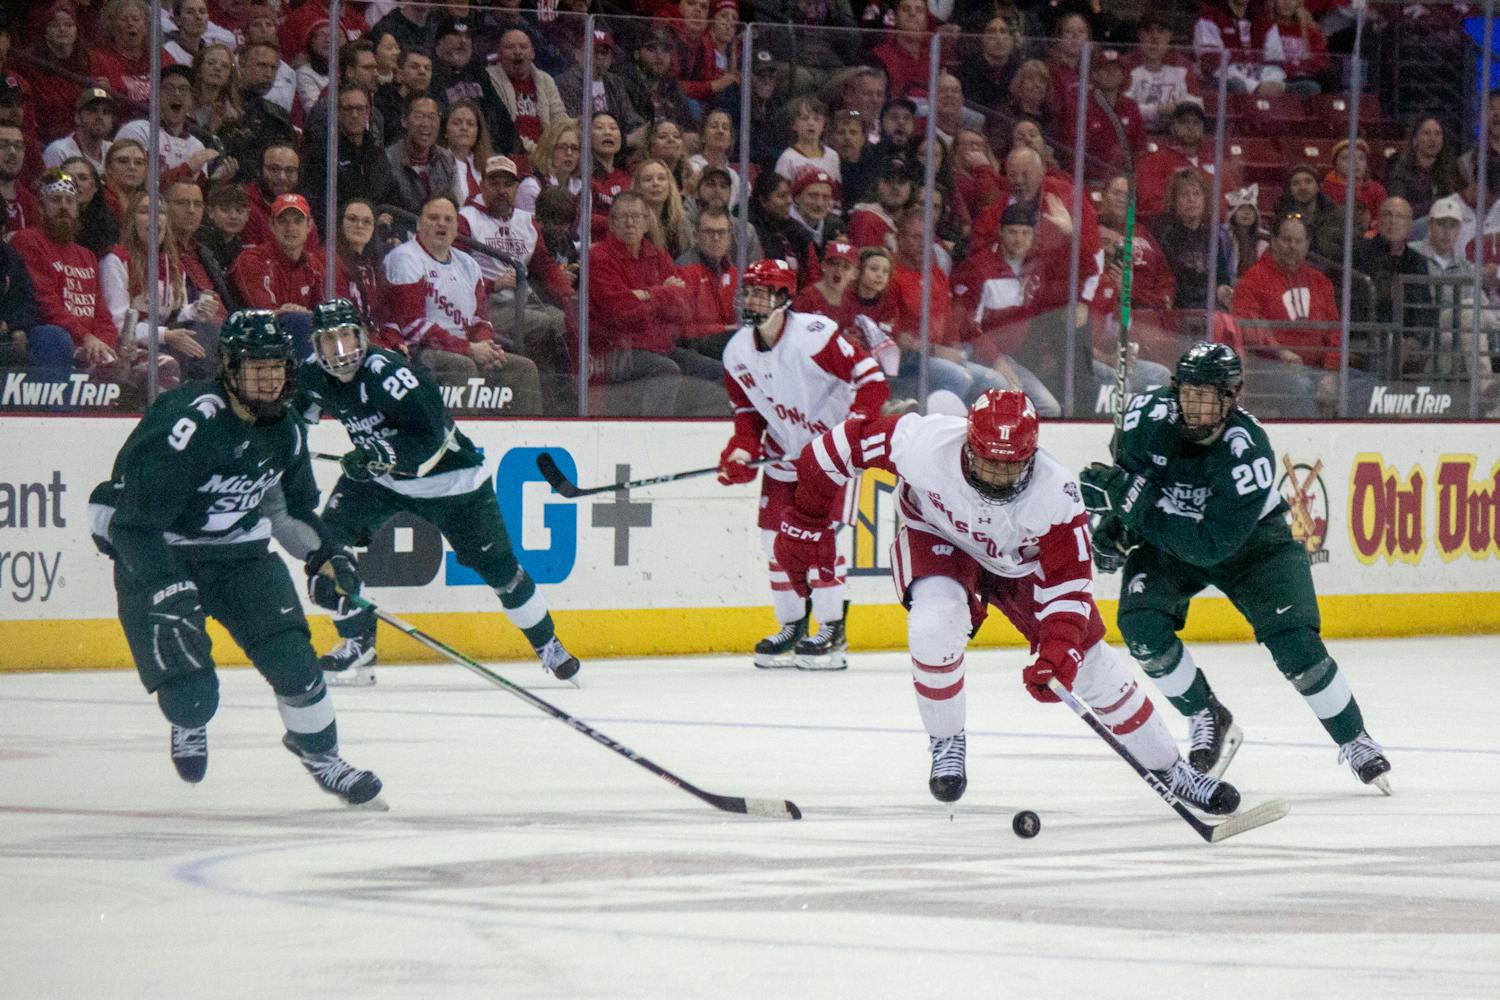 PHOTOS: Badgers defeated by Michigan State Spartans 5-2